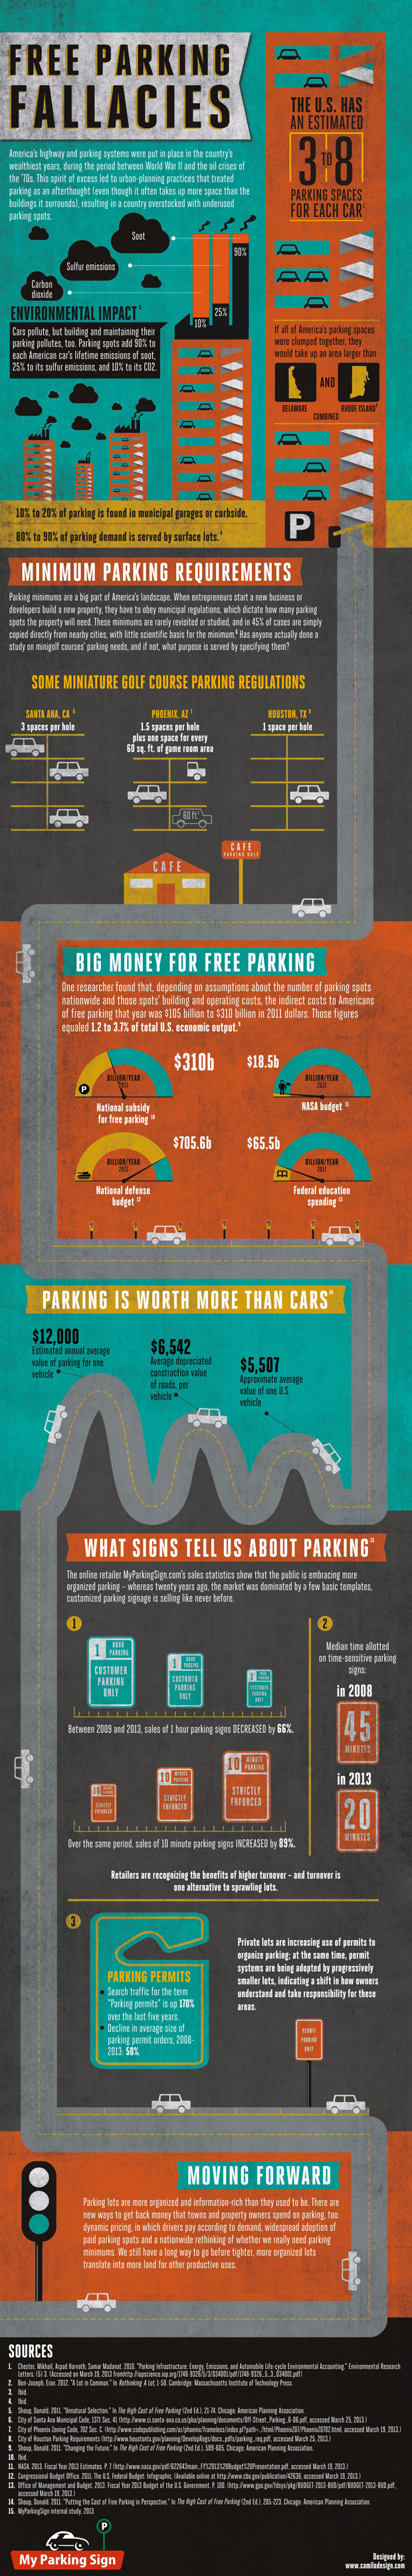 infographic-free-parking-fallacies-620